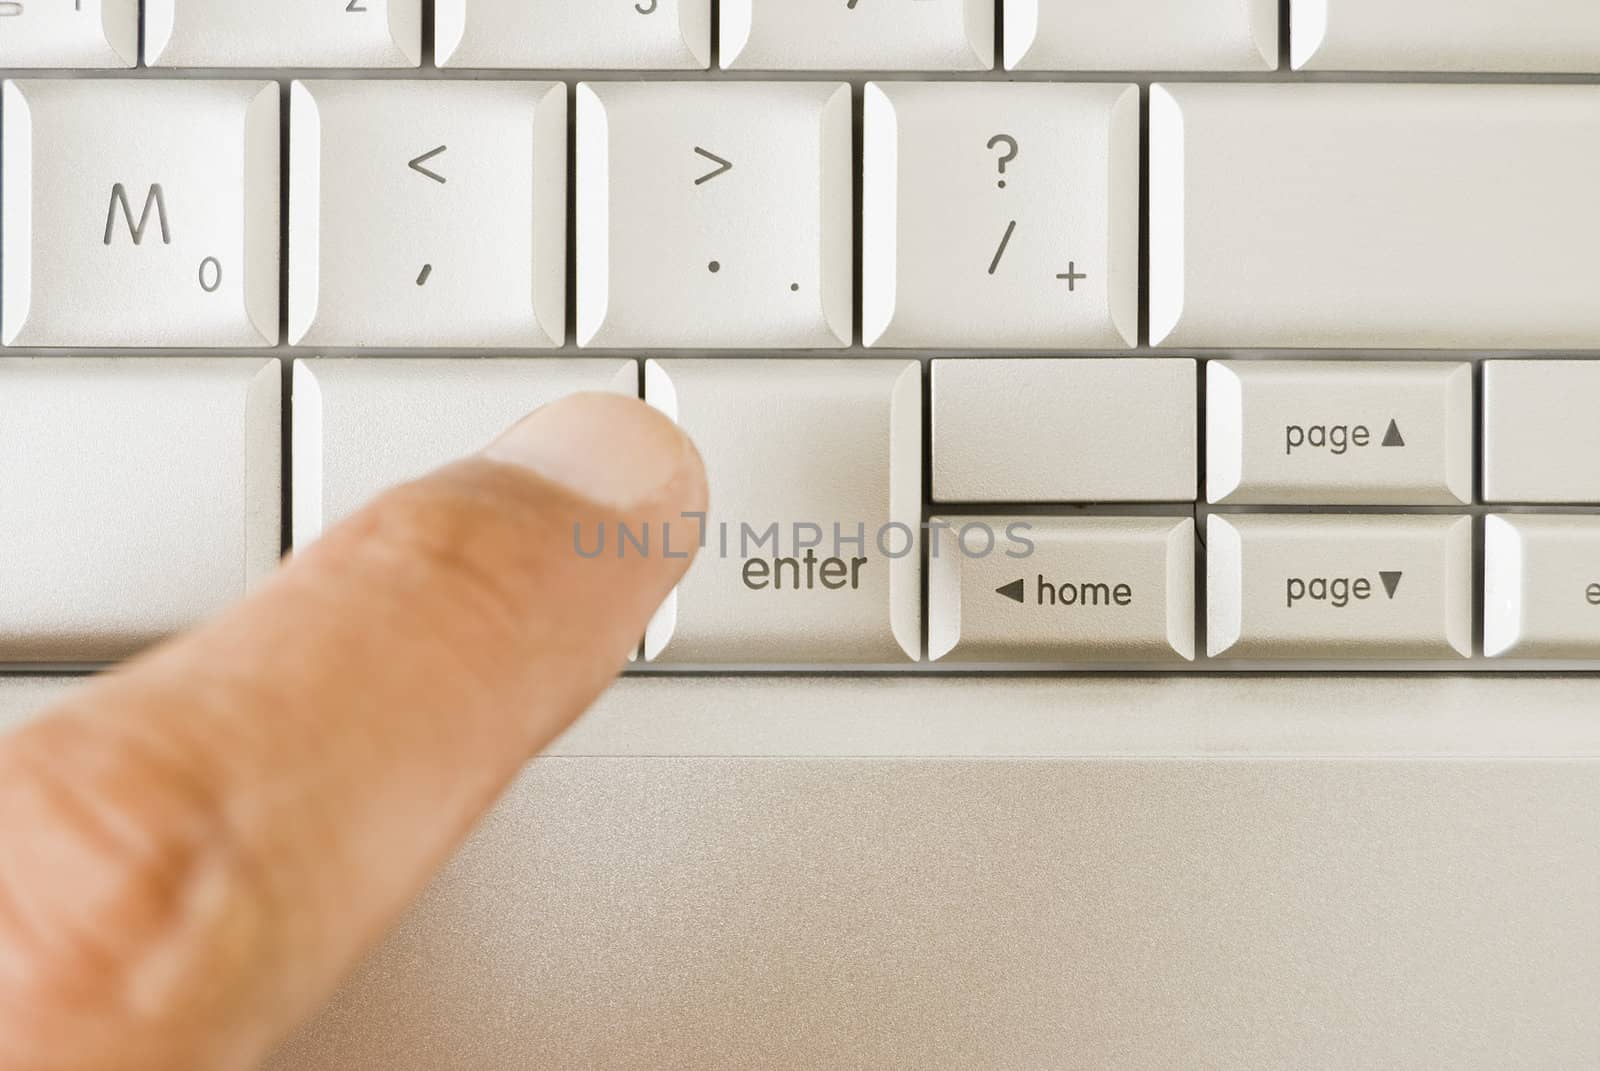 Forefinger about to hit "enter" on computer keyboard